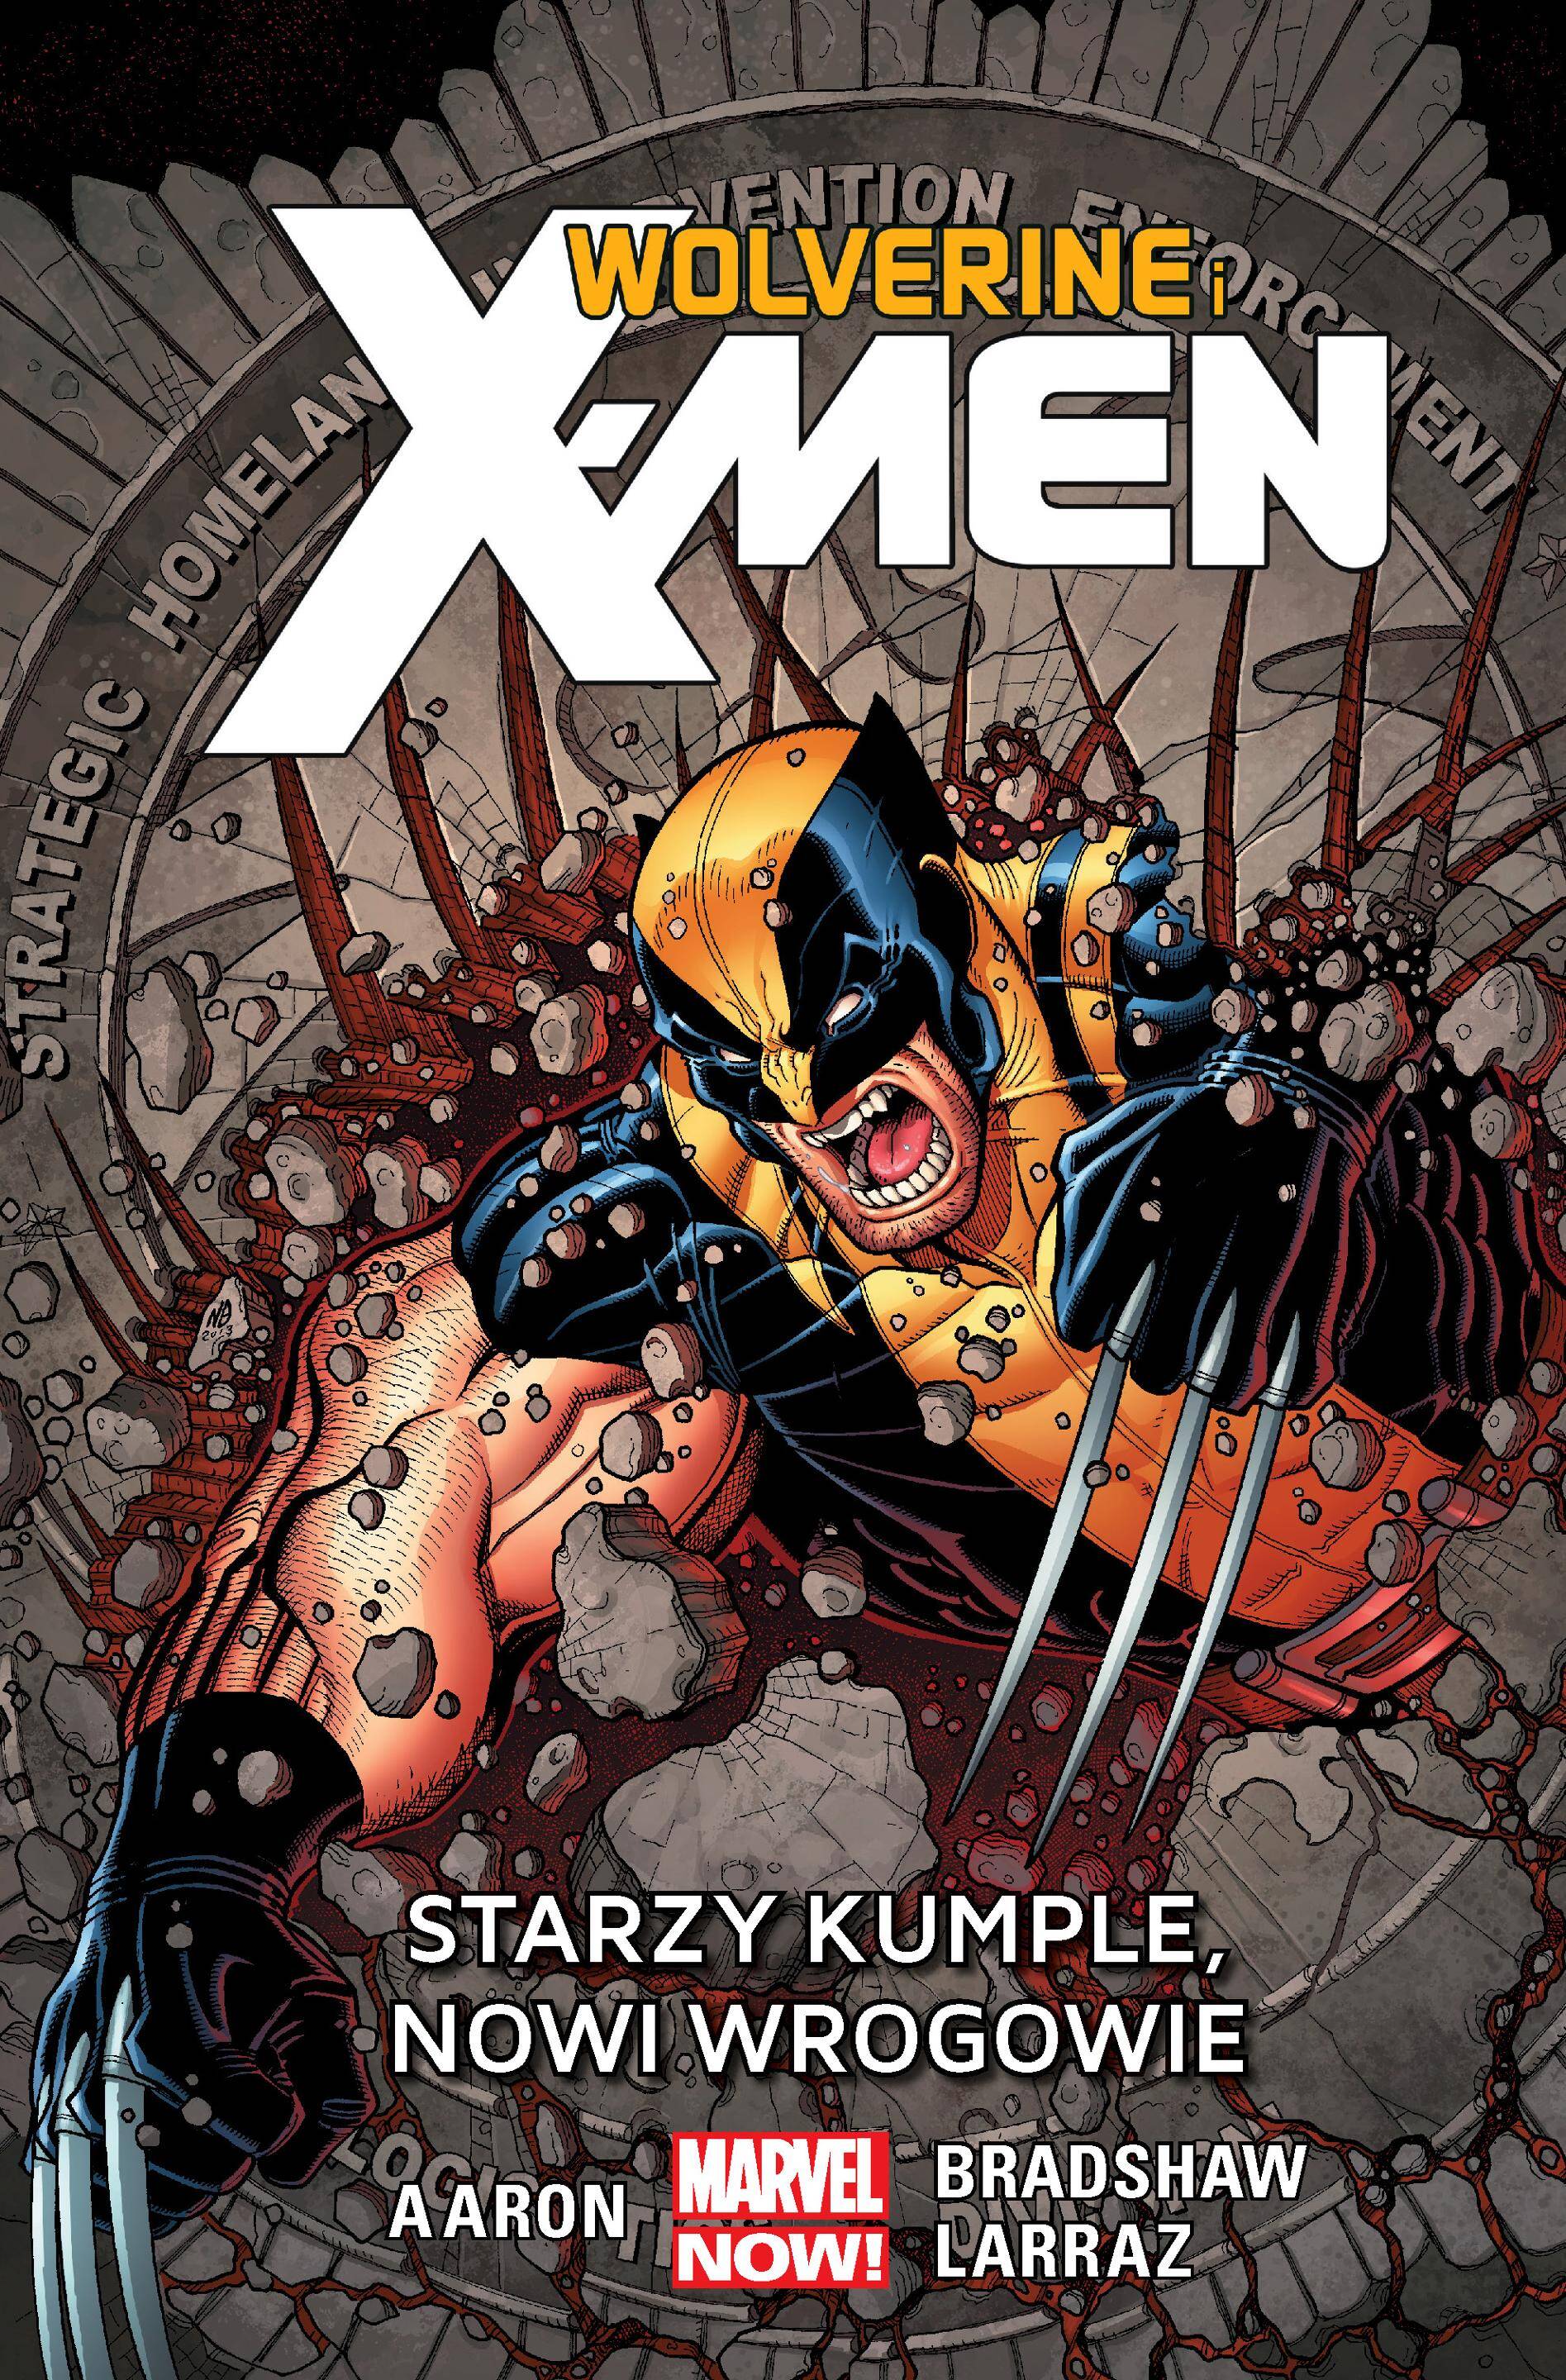 Starzy kumple nowi wrogowie Wolverine and the X-Men Tom 4